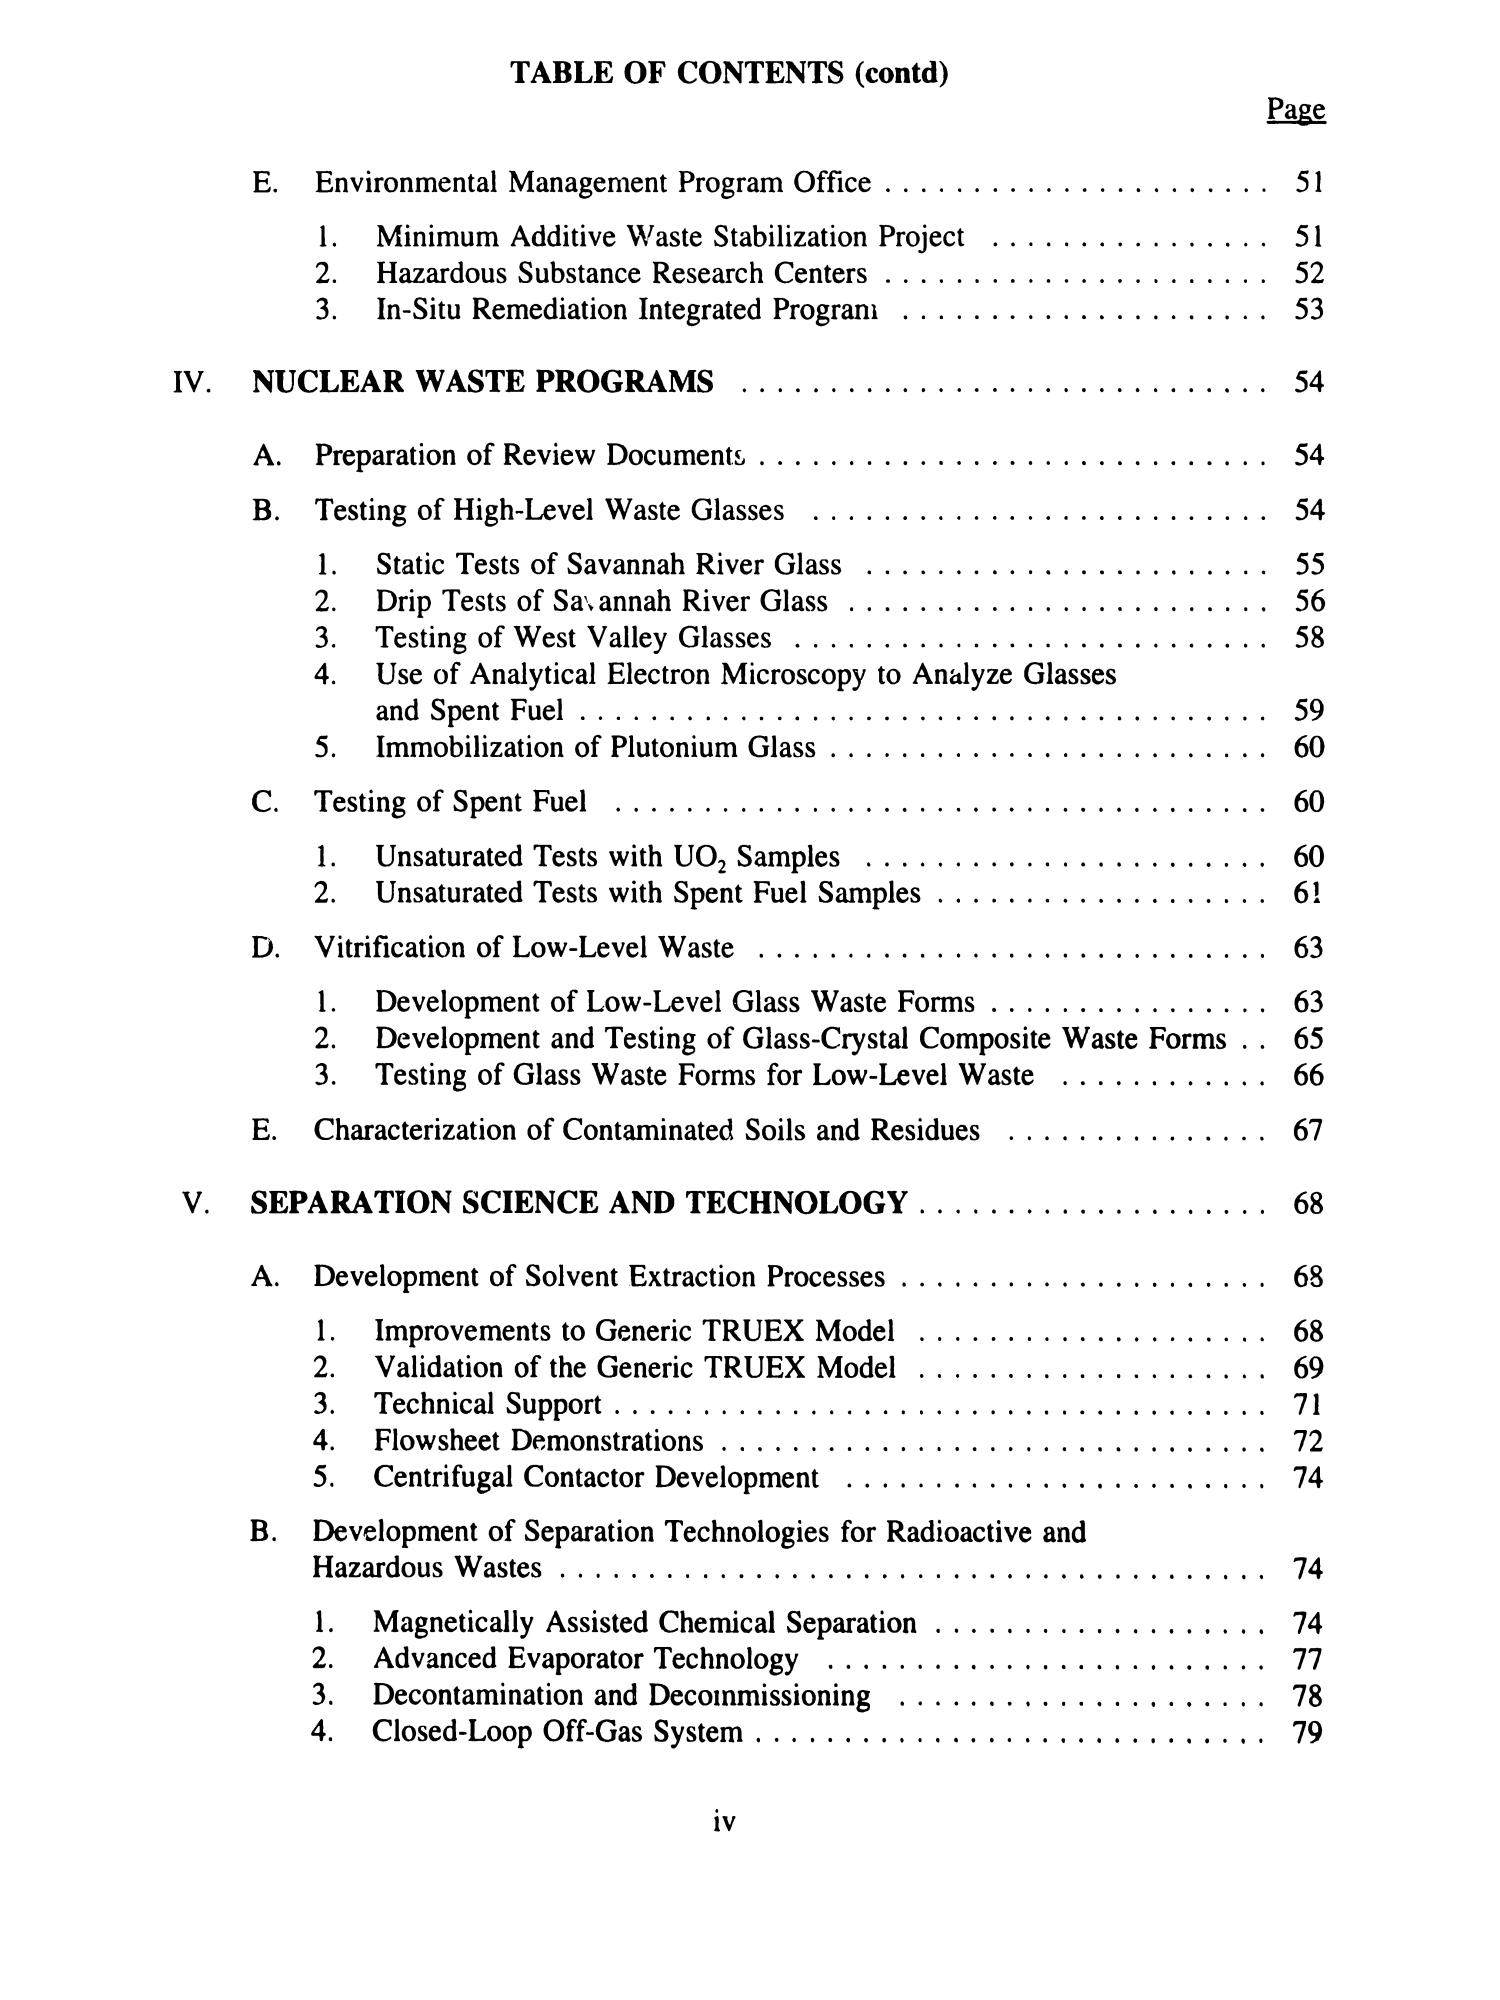 Chemical Technology Division Annual Technical Report: 1994
                                                
                                                    IV
                                                